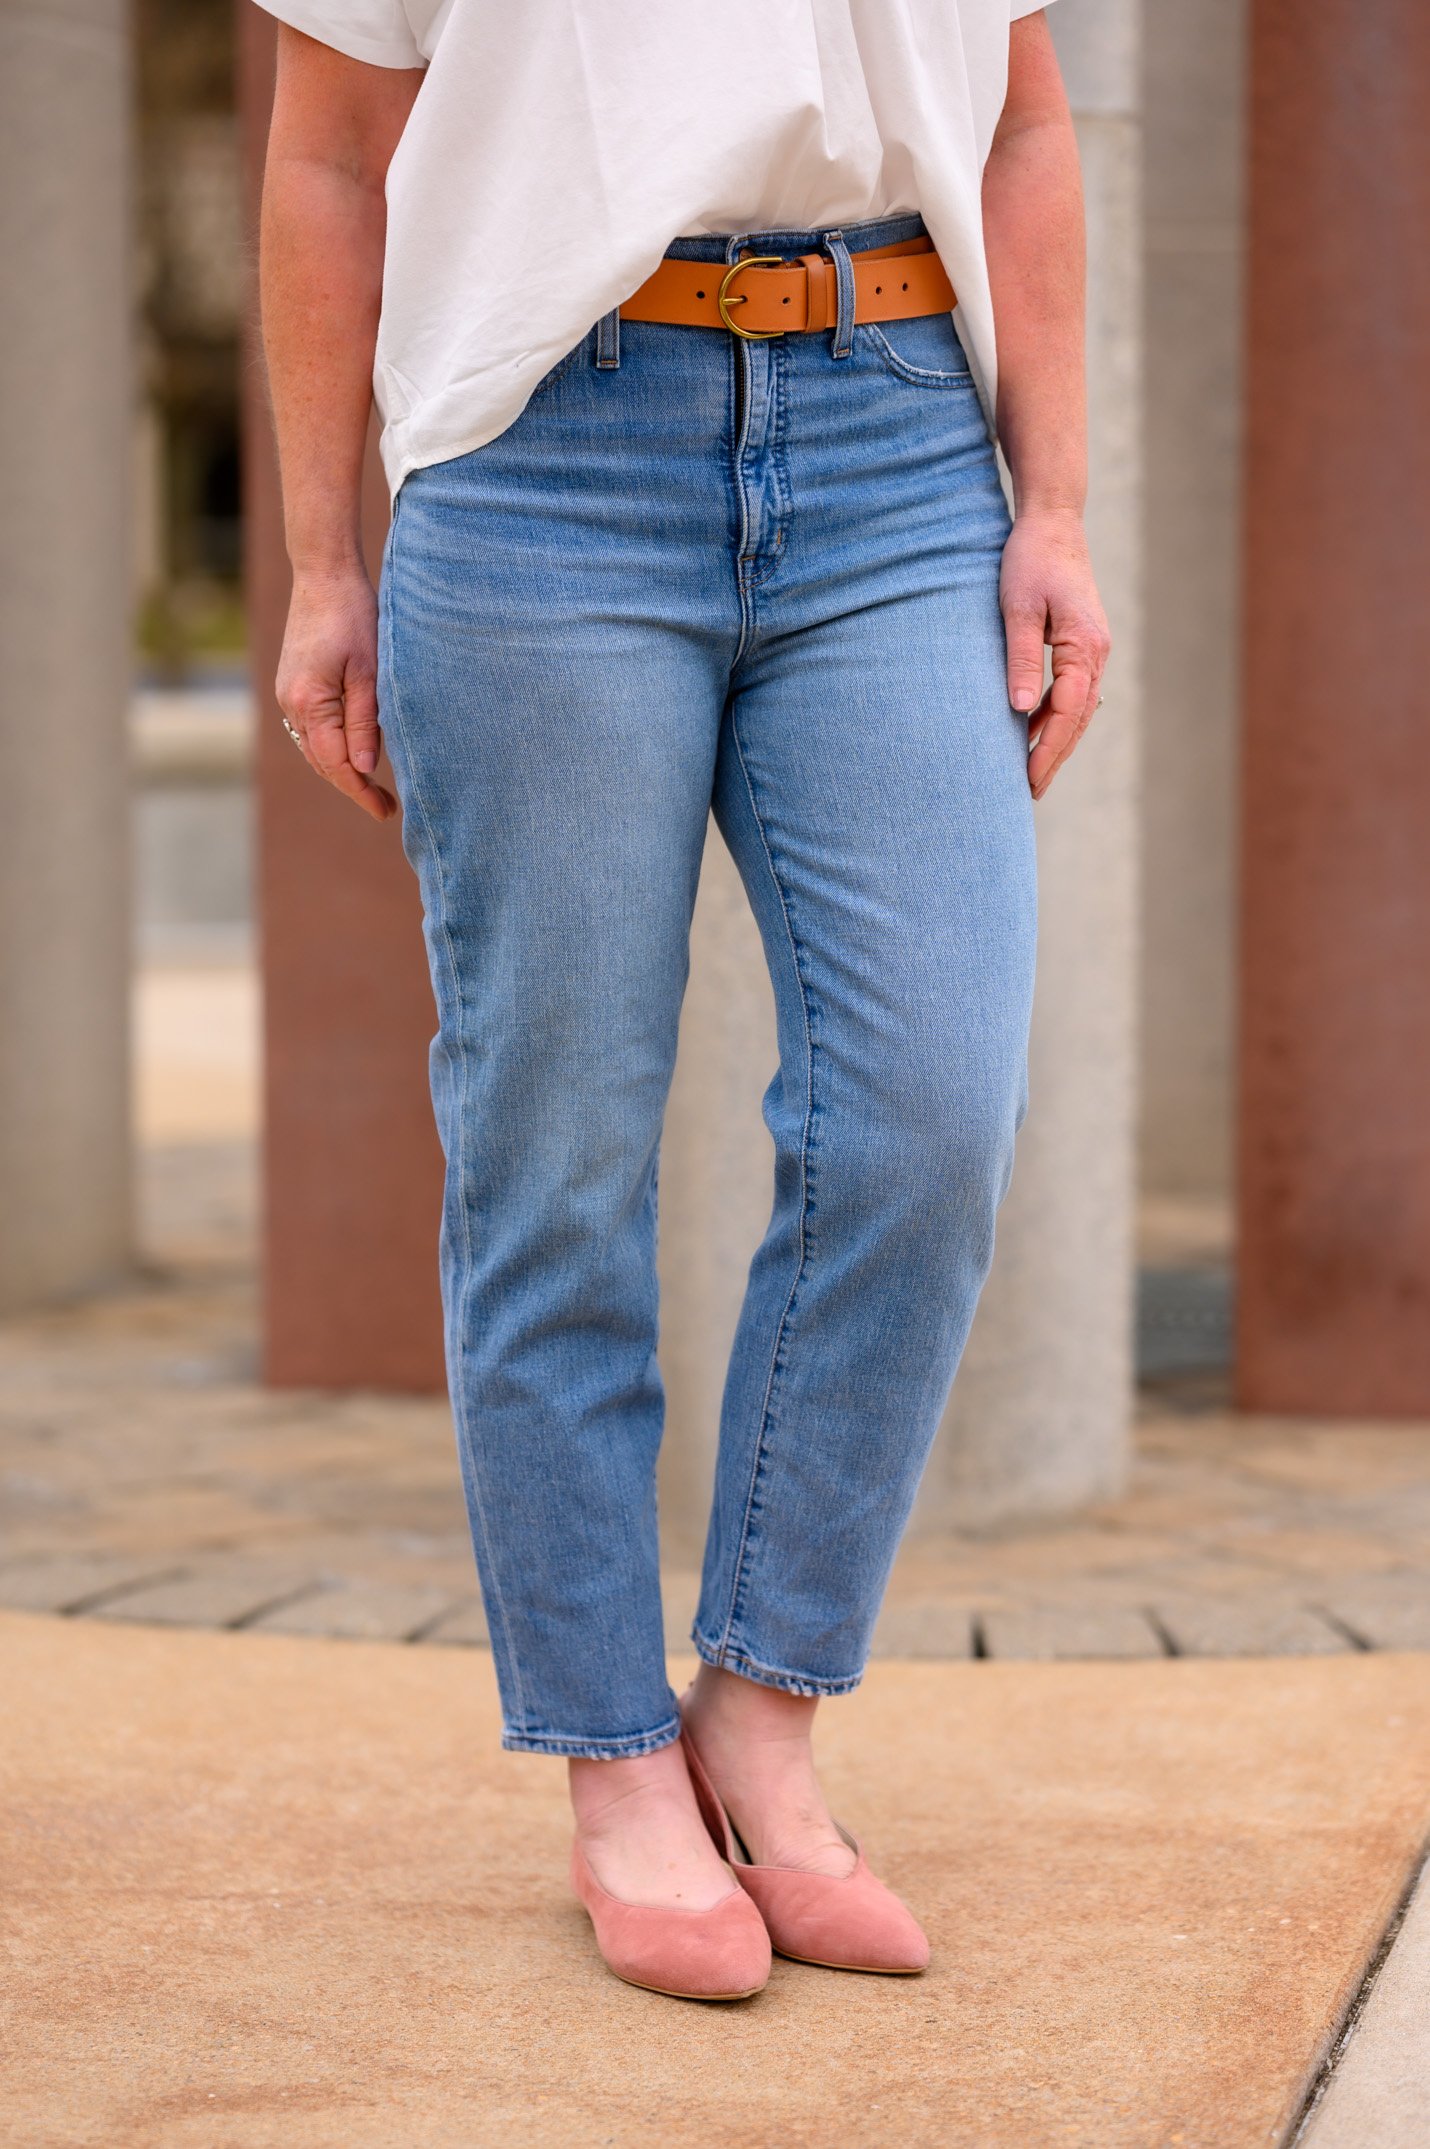 Casual Jeans Outfit Without a Tee 